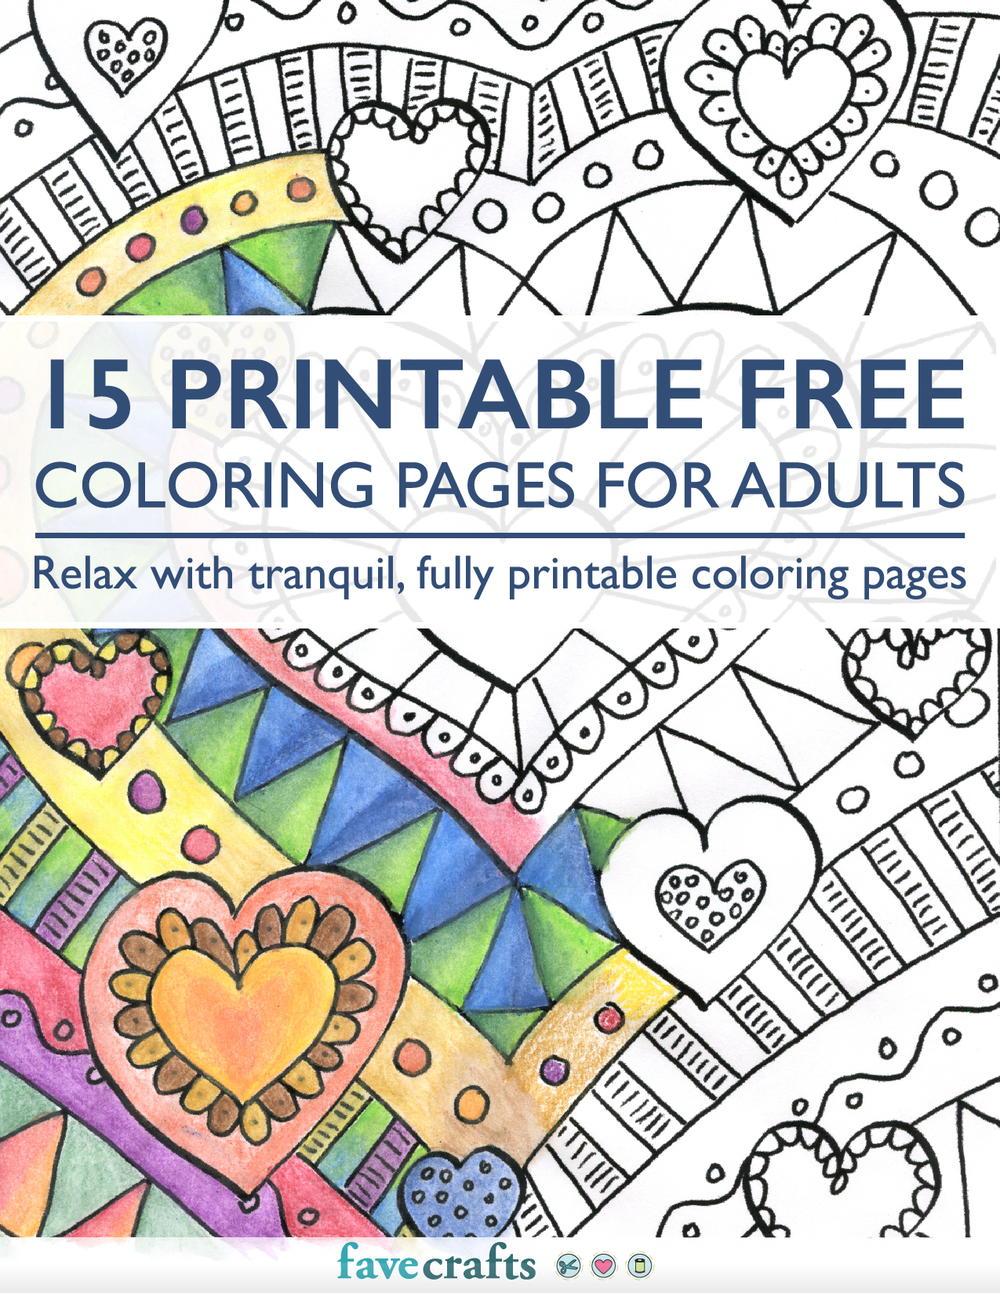 15-printable-free-coloring-pages-for-adults-pdf-favecrafts